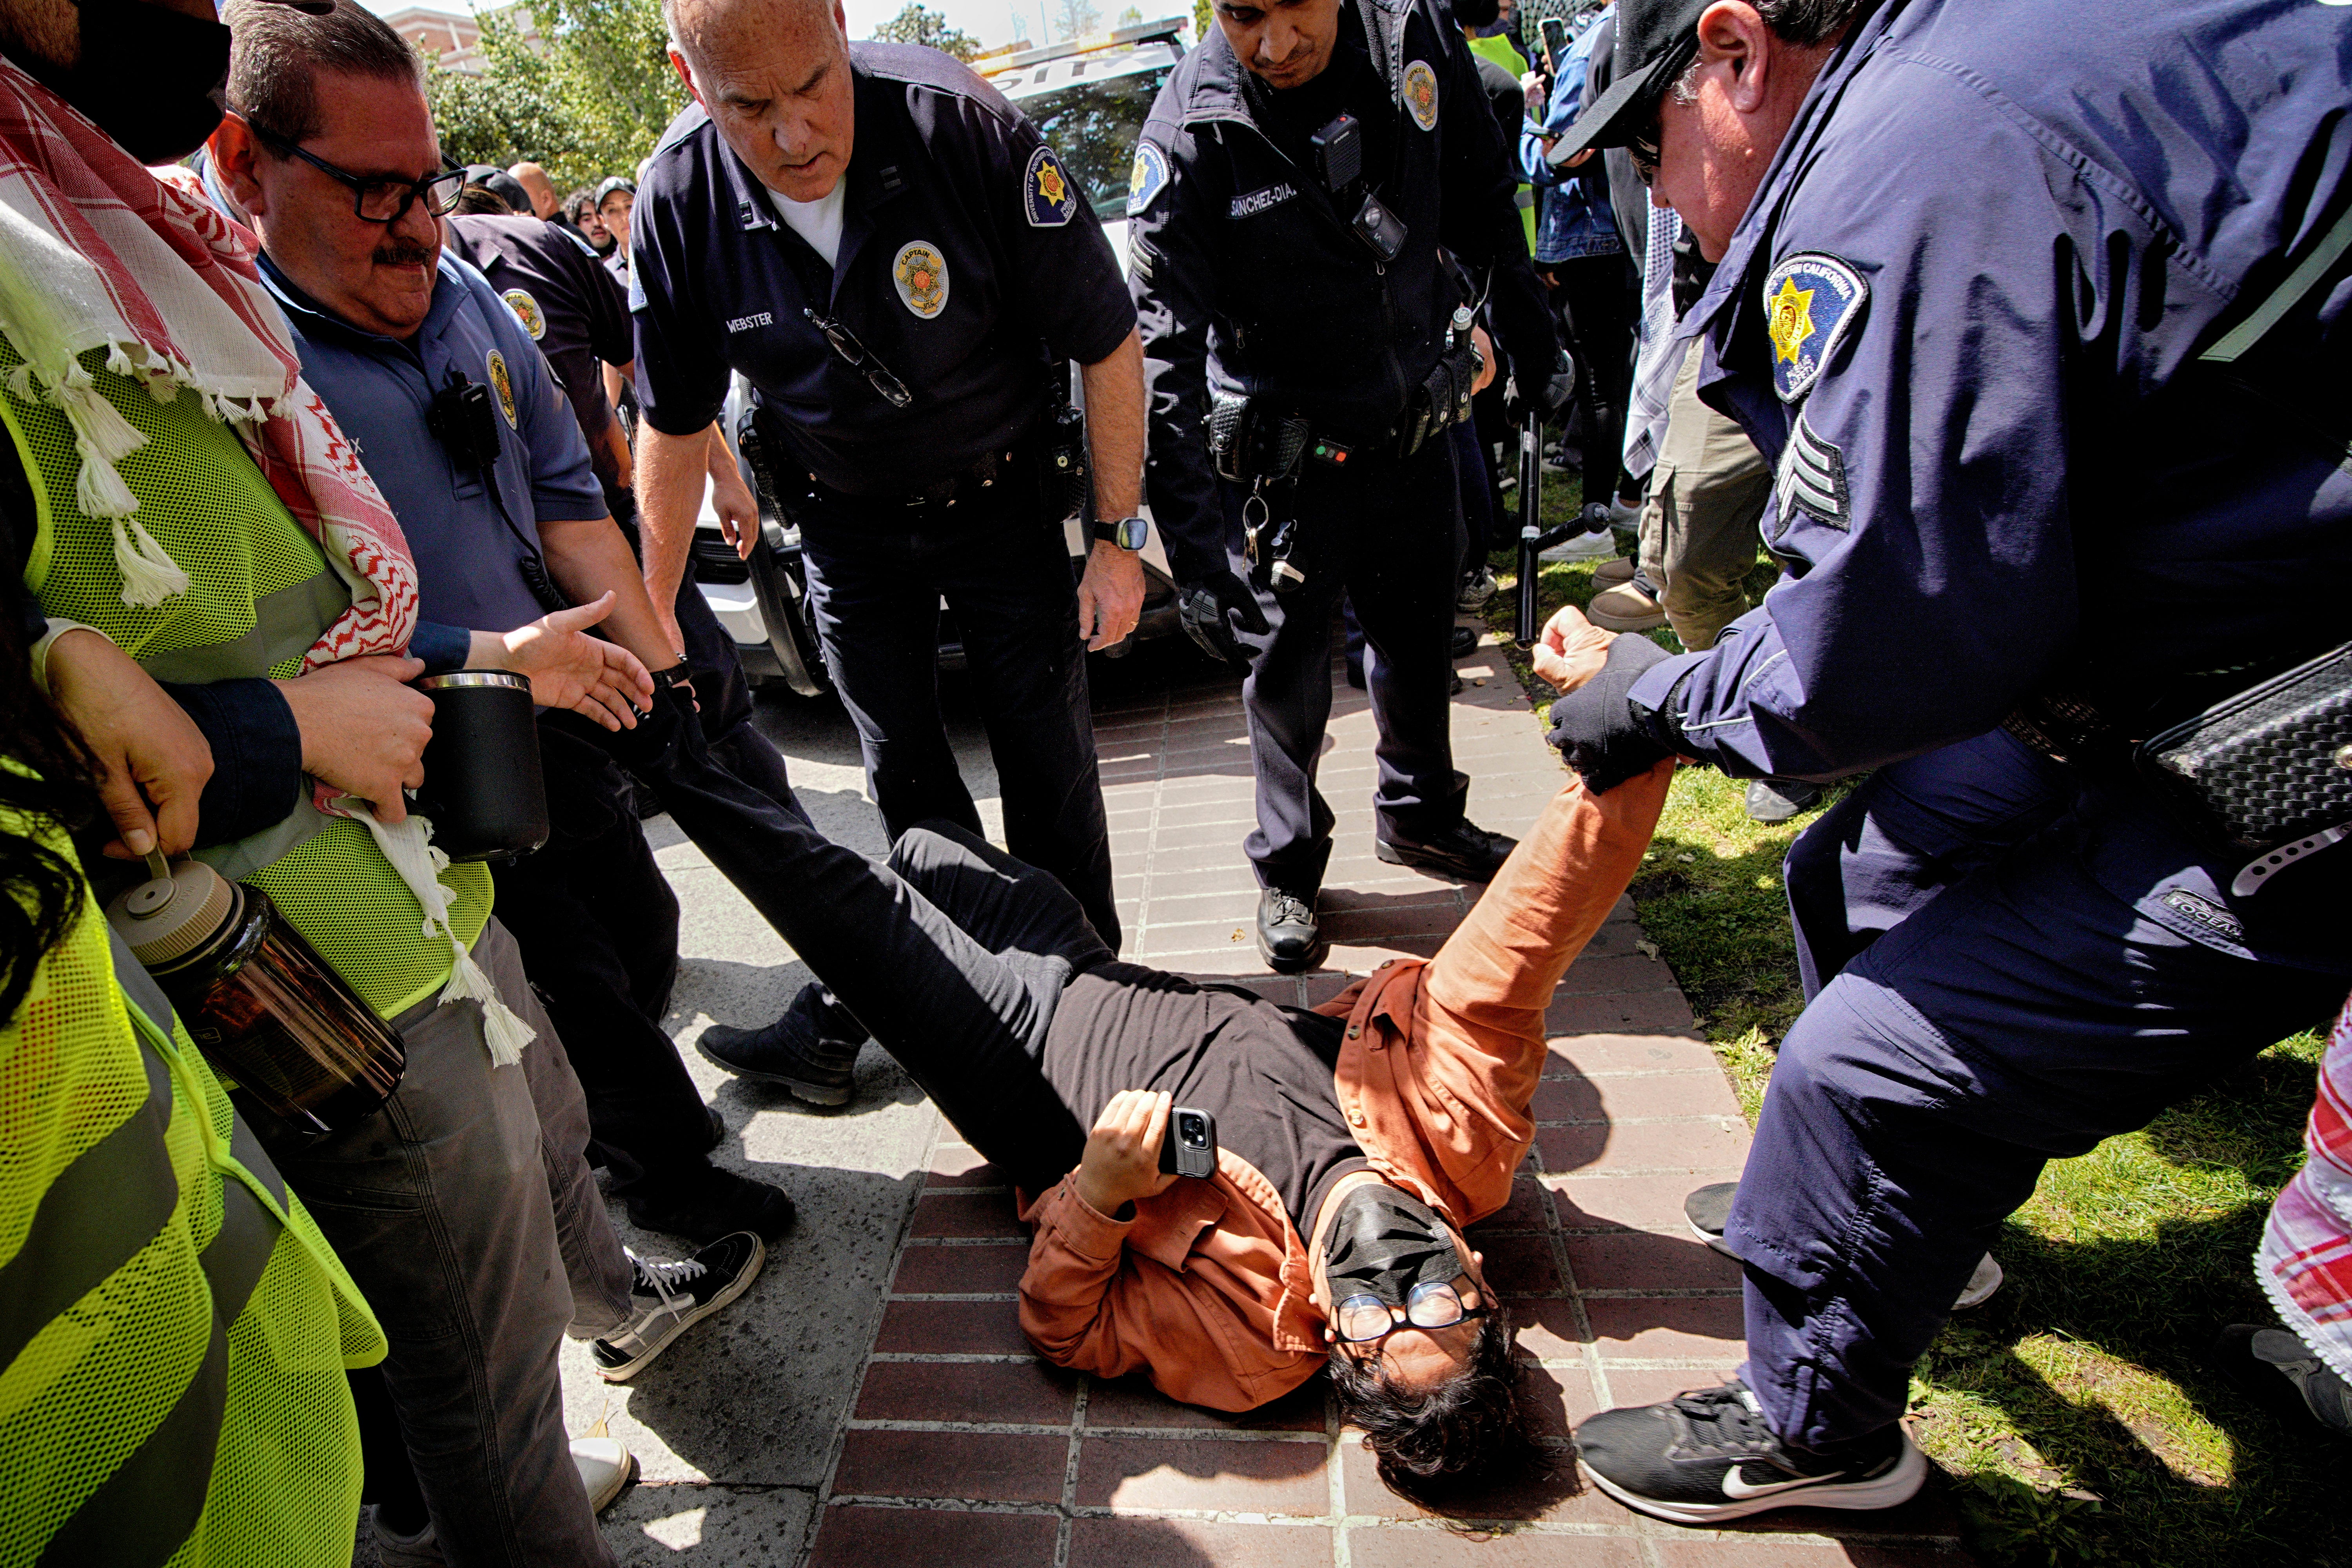 A protester at USC is detained by campus security following clashes at the university on Wednesday 24 April